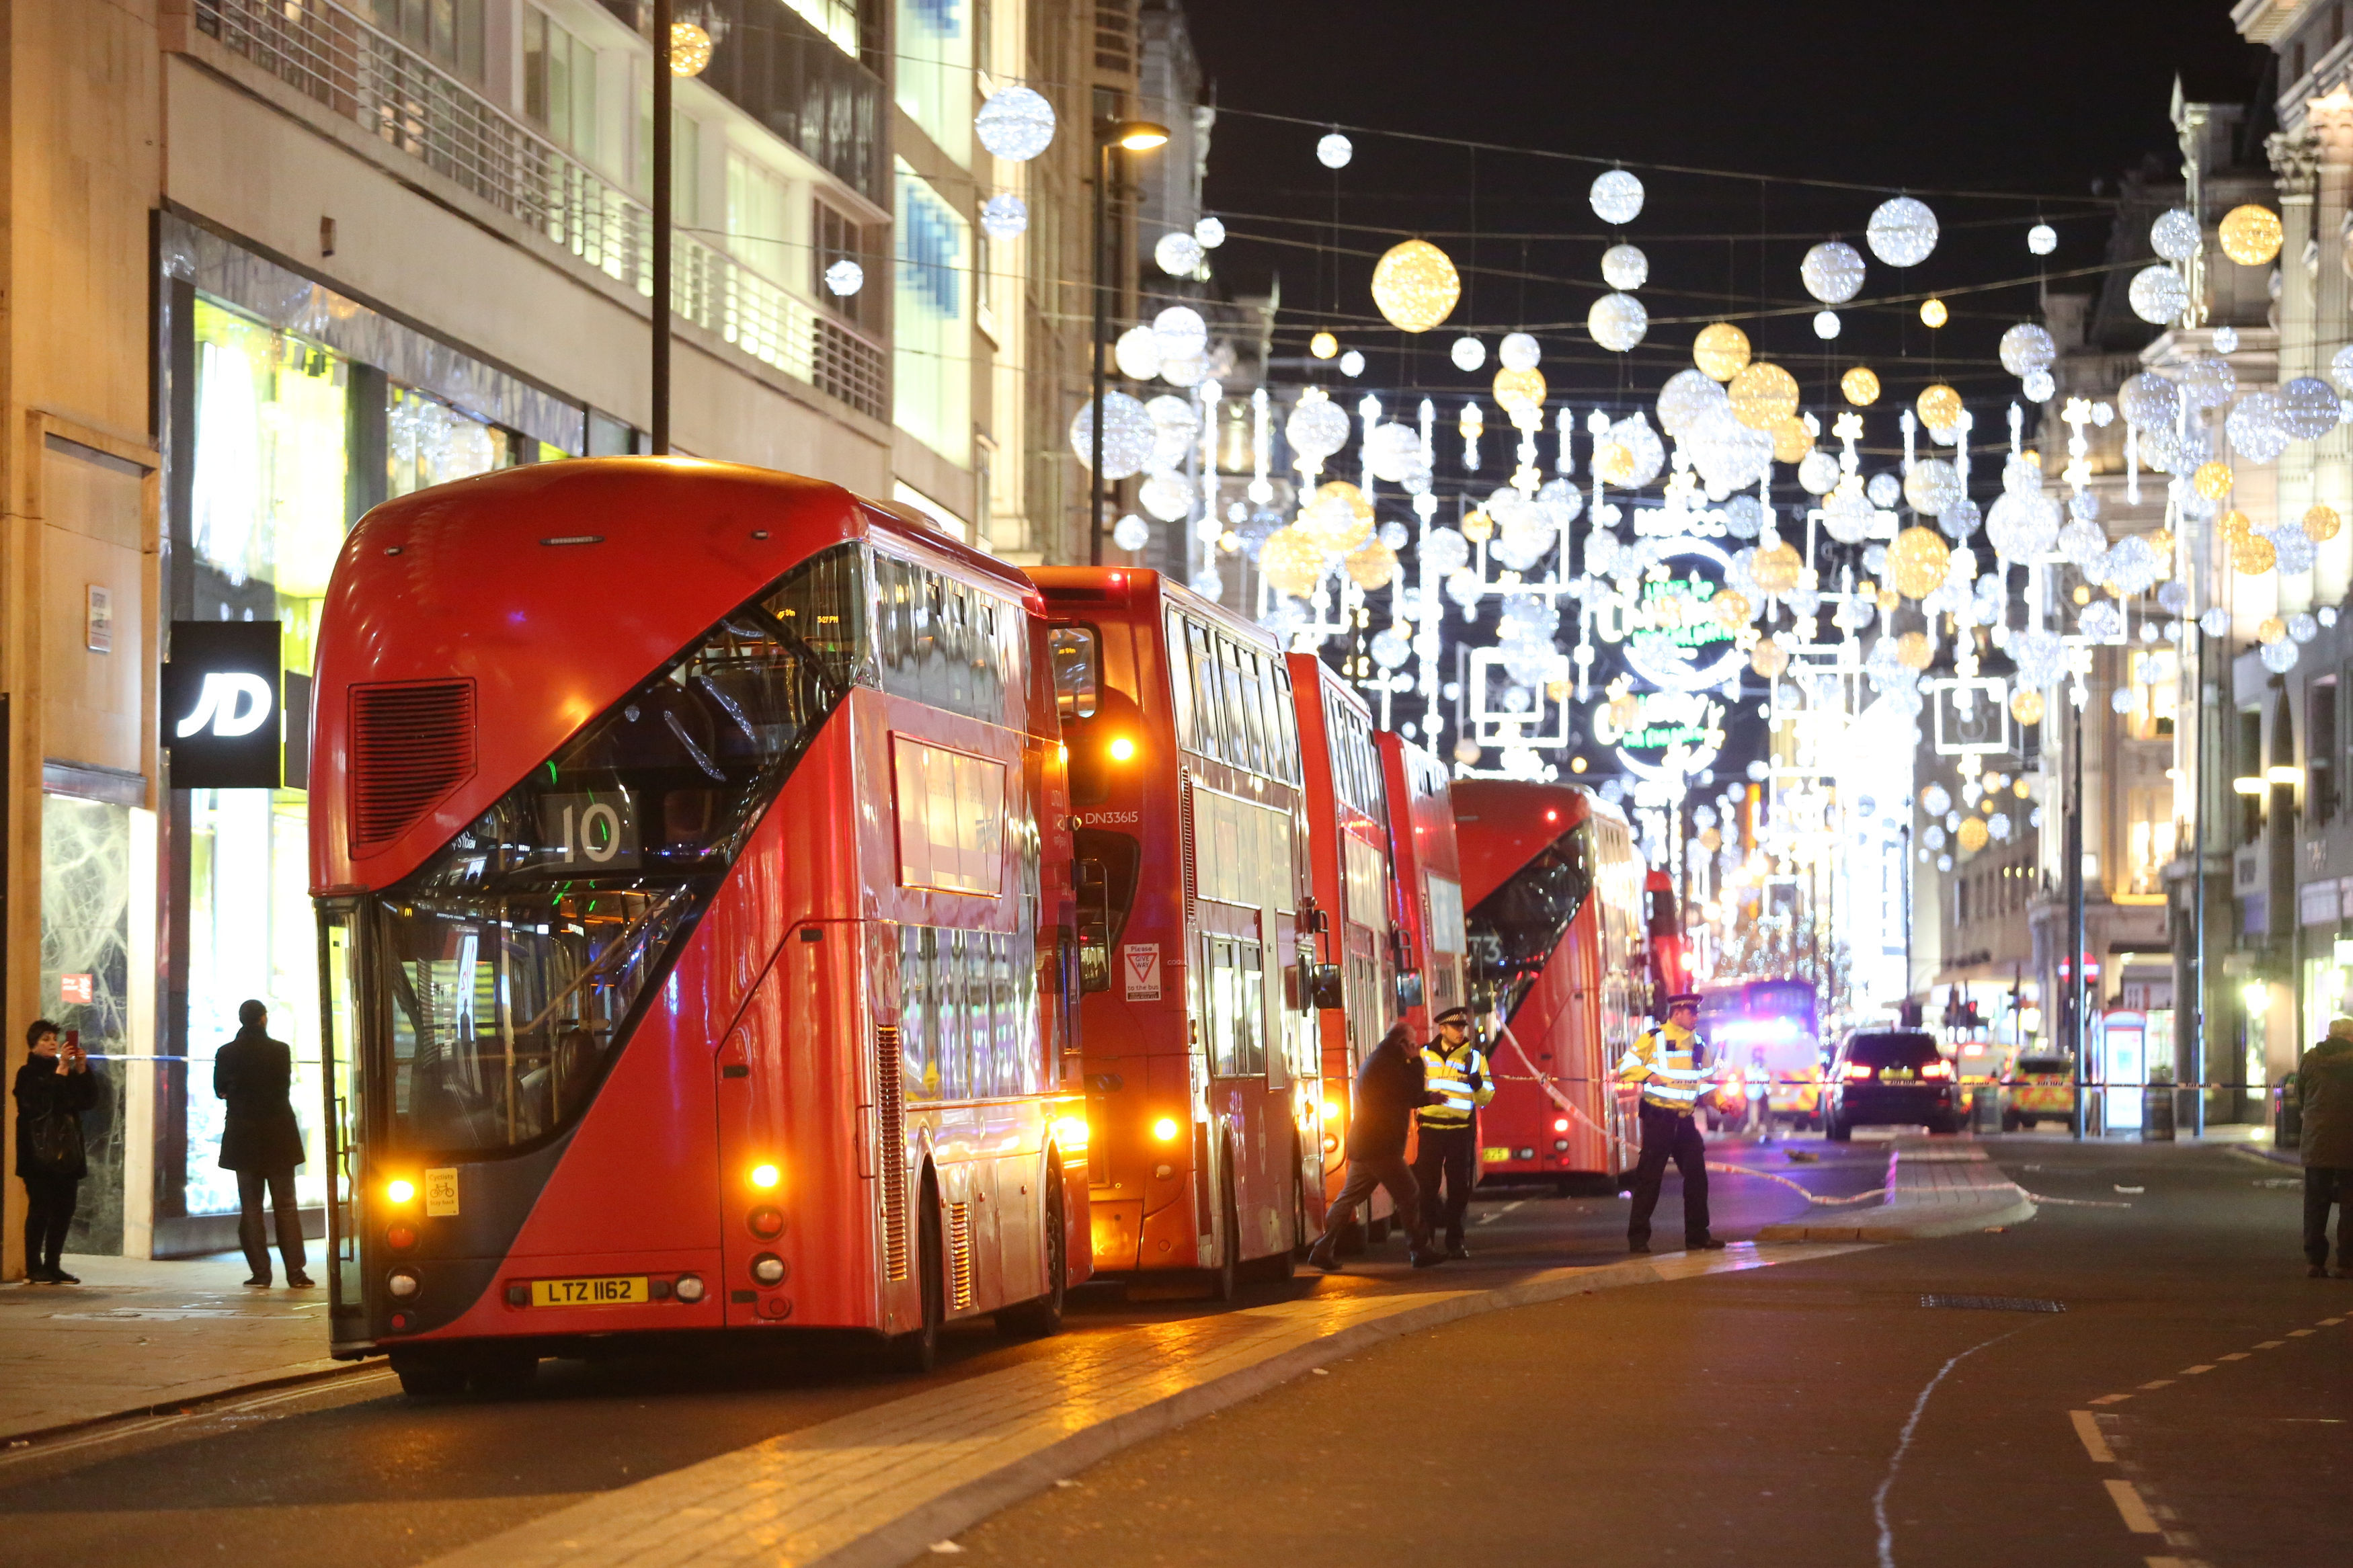 Buses on Oxford Street